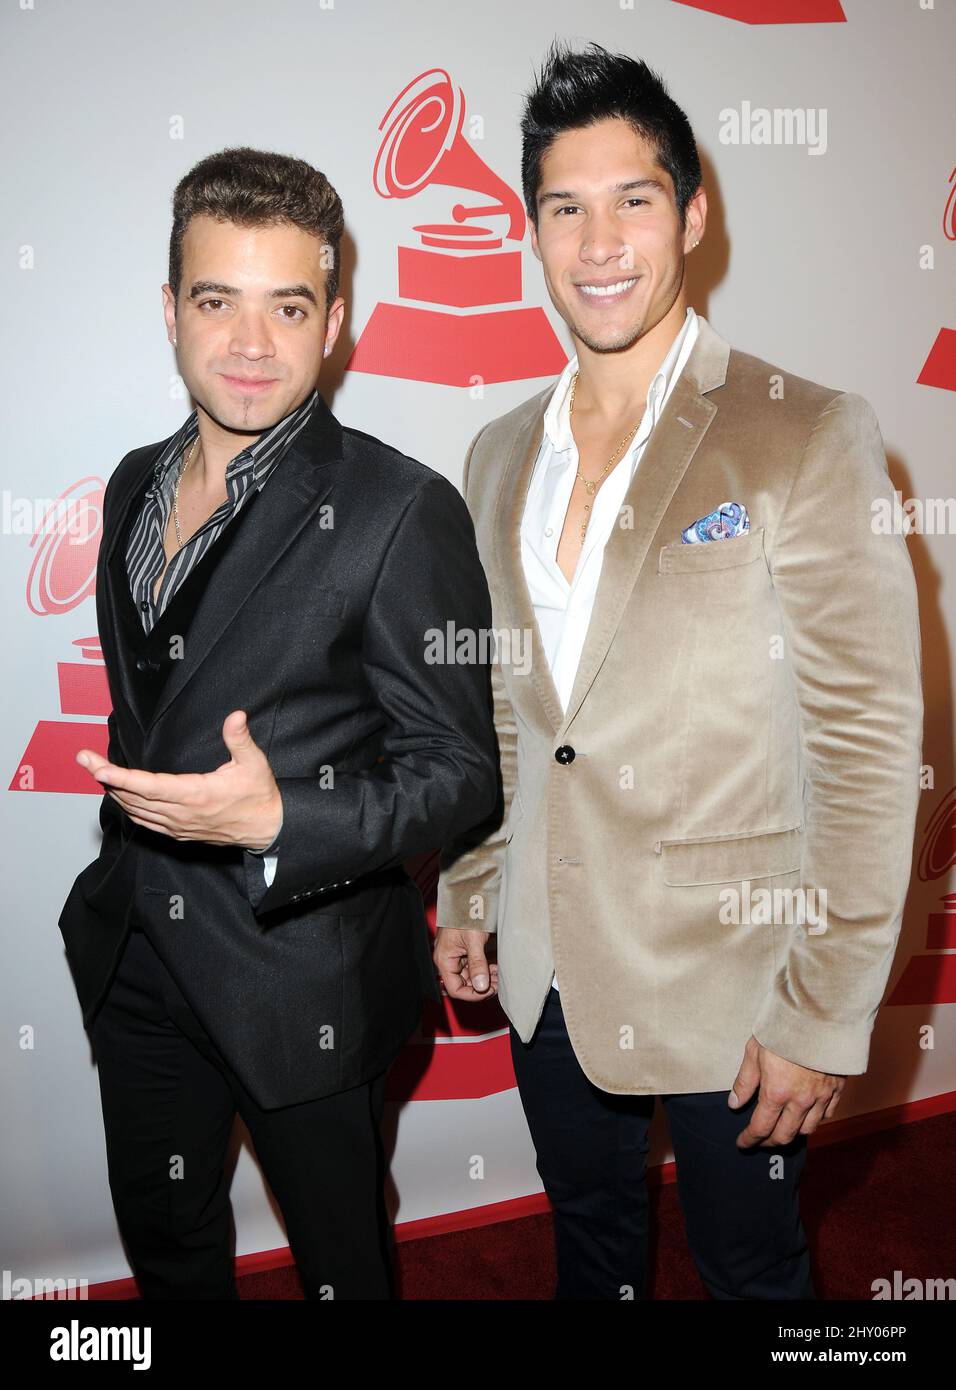 Chino Y Nacho nimmt an der Latin Recording Academy Person of the Year Tribute to Caetano Veloso 2012 in der MGM Grand Garden Arena in Las Vegas, USA, Teil. Stockfoto